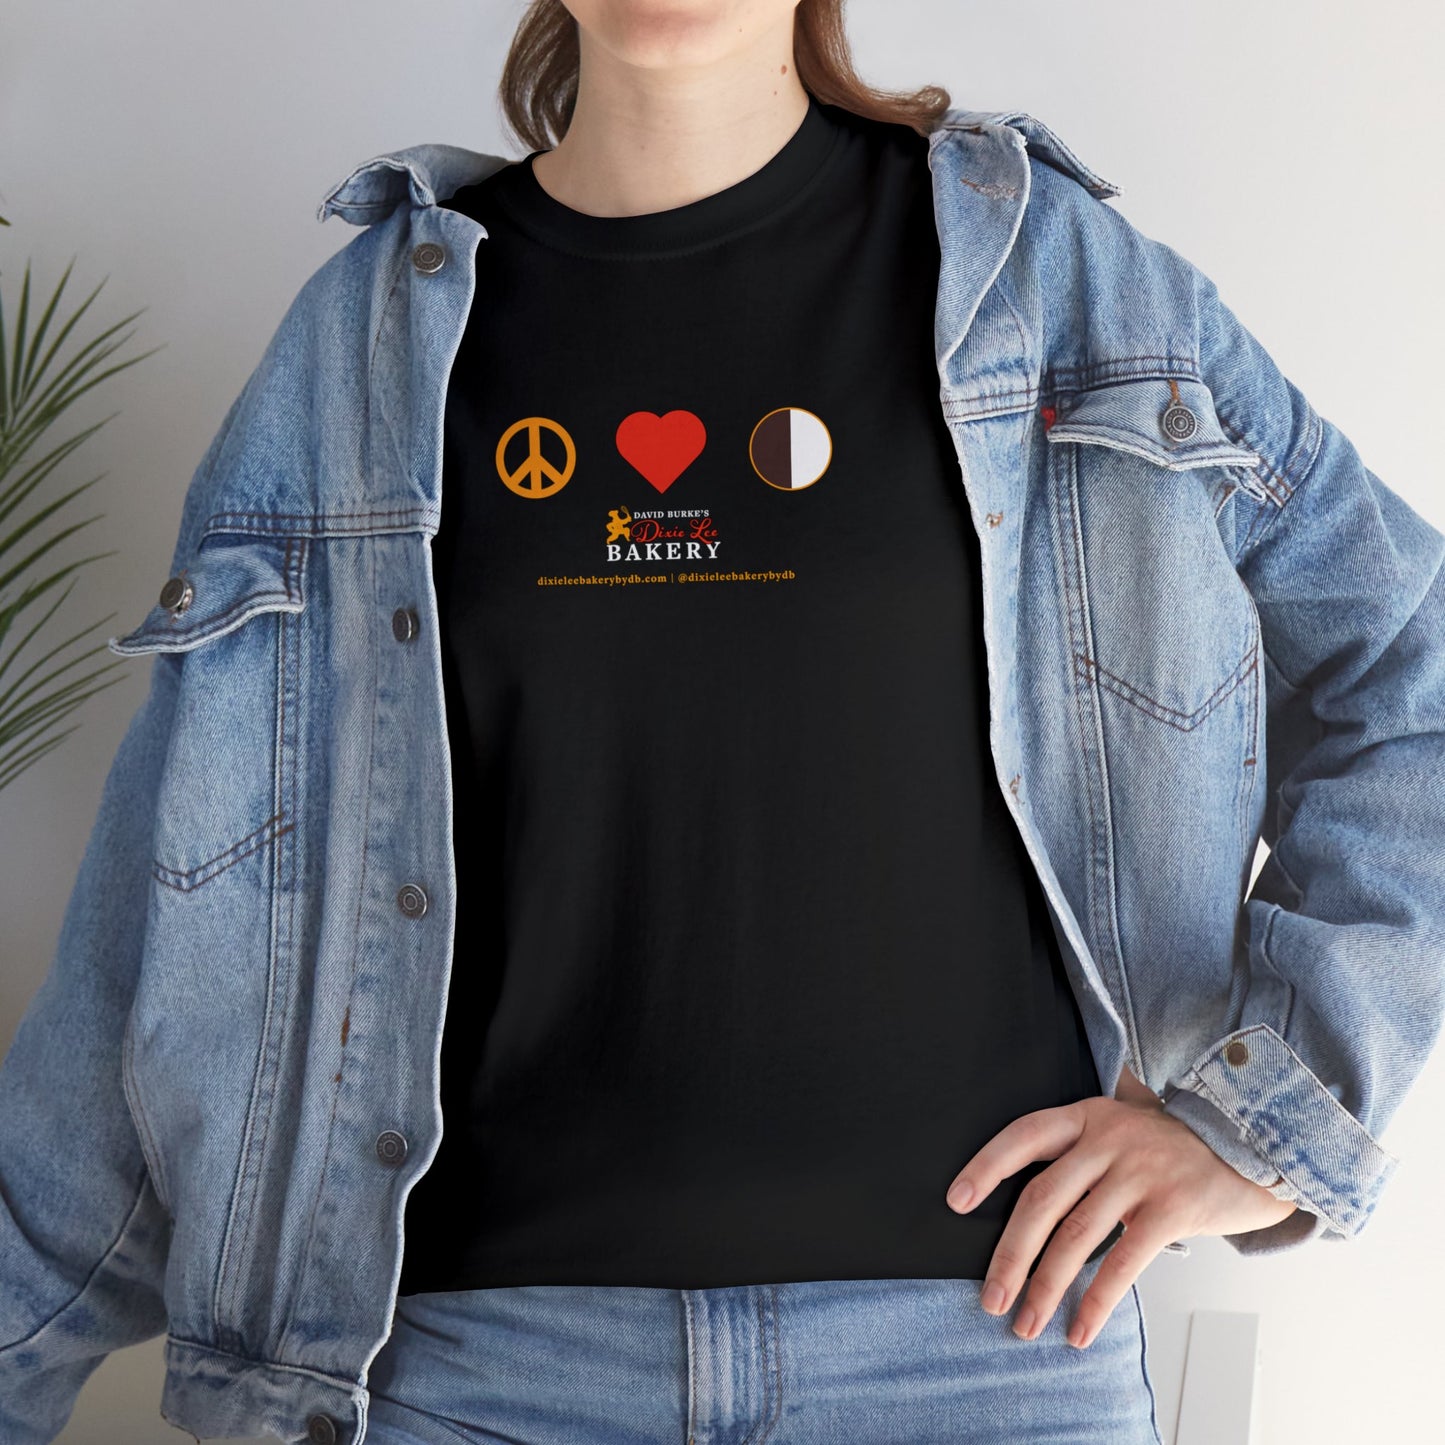 Peace, Love and Cookies! The Classic Chef David Burke Bakery T-shirt